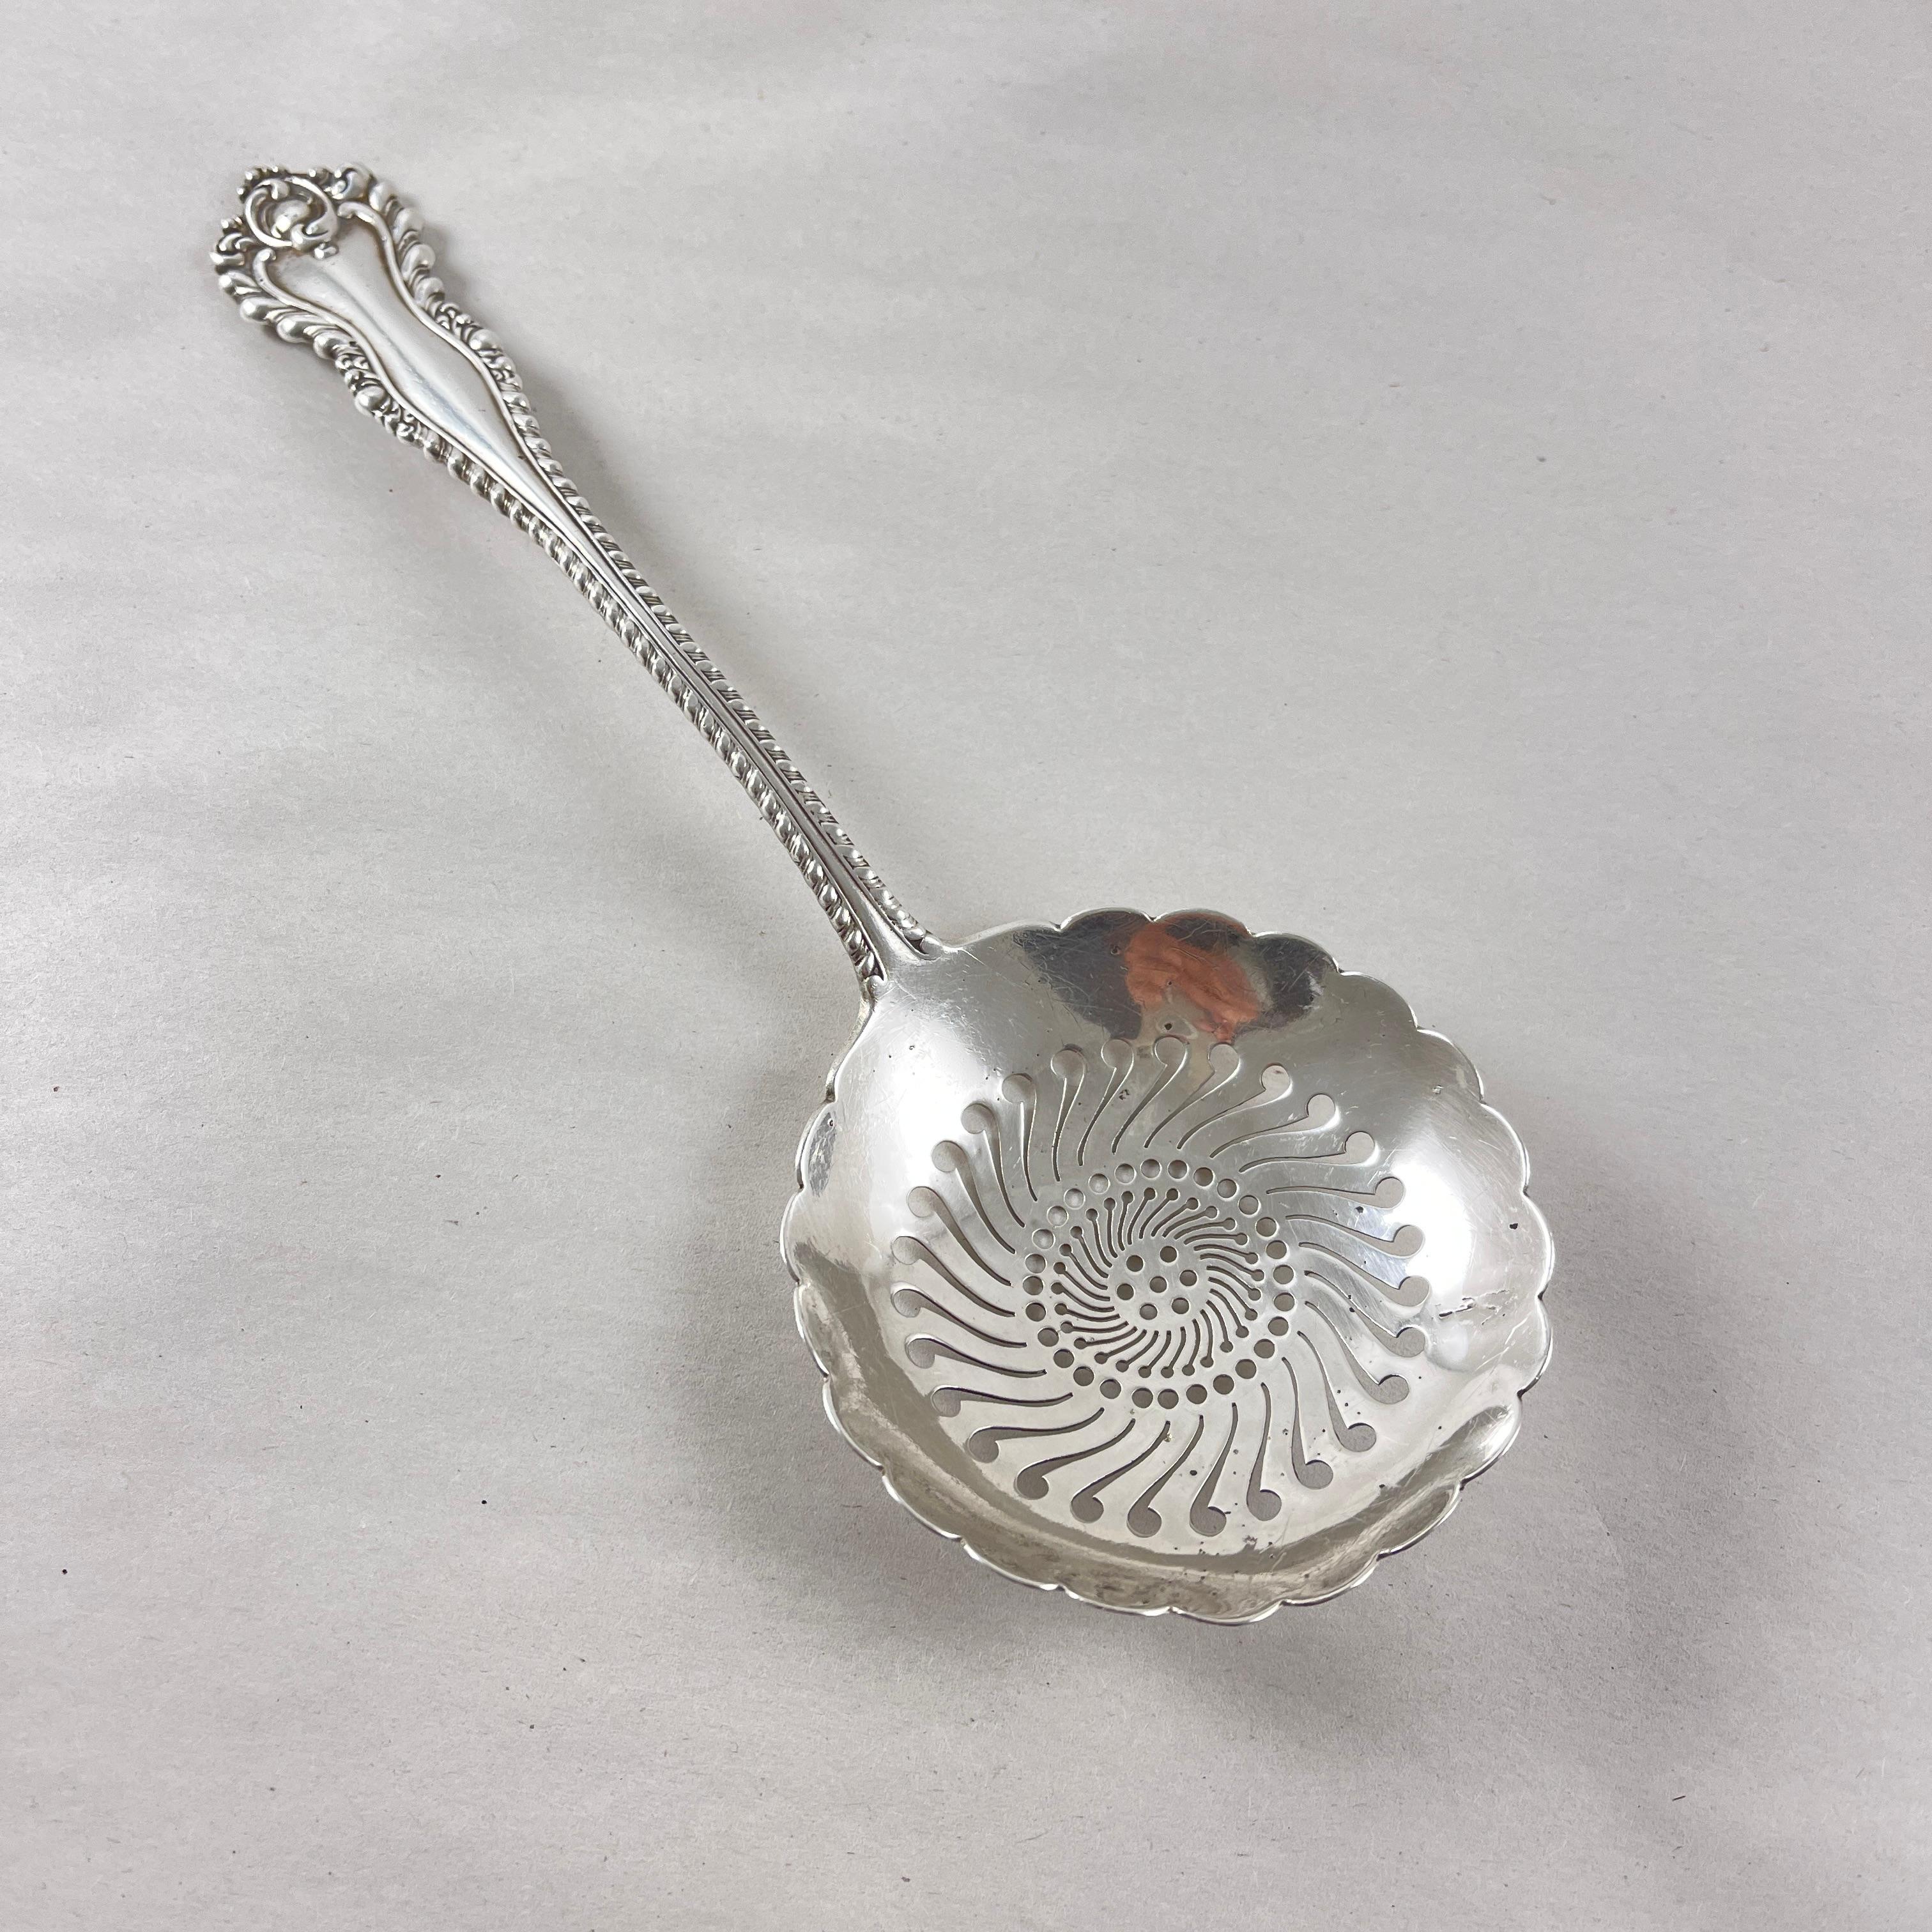 American Dominick & Haff Estate Sterling Silver Hand Made Slotted Spoon, 1892 For Sale